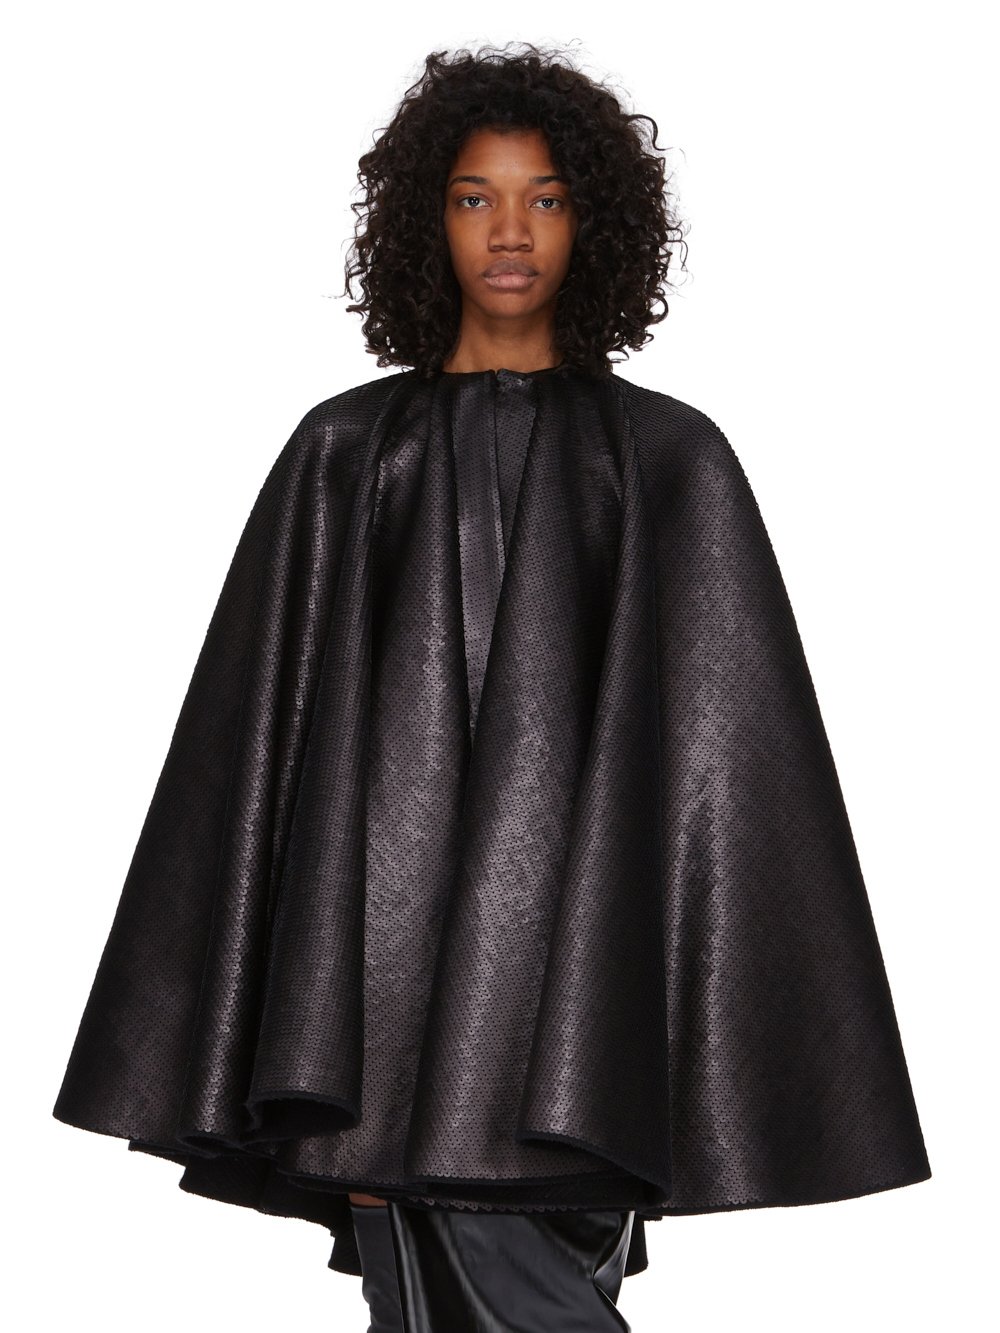 RICK OWENS FW23 LUXOR RUNWAY CIRCLE CAPE IN BLACK SEQUIN EMBROIDERED BOILED WOOL